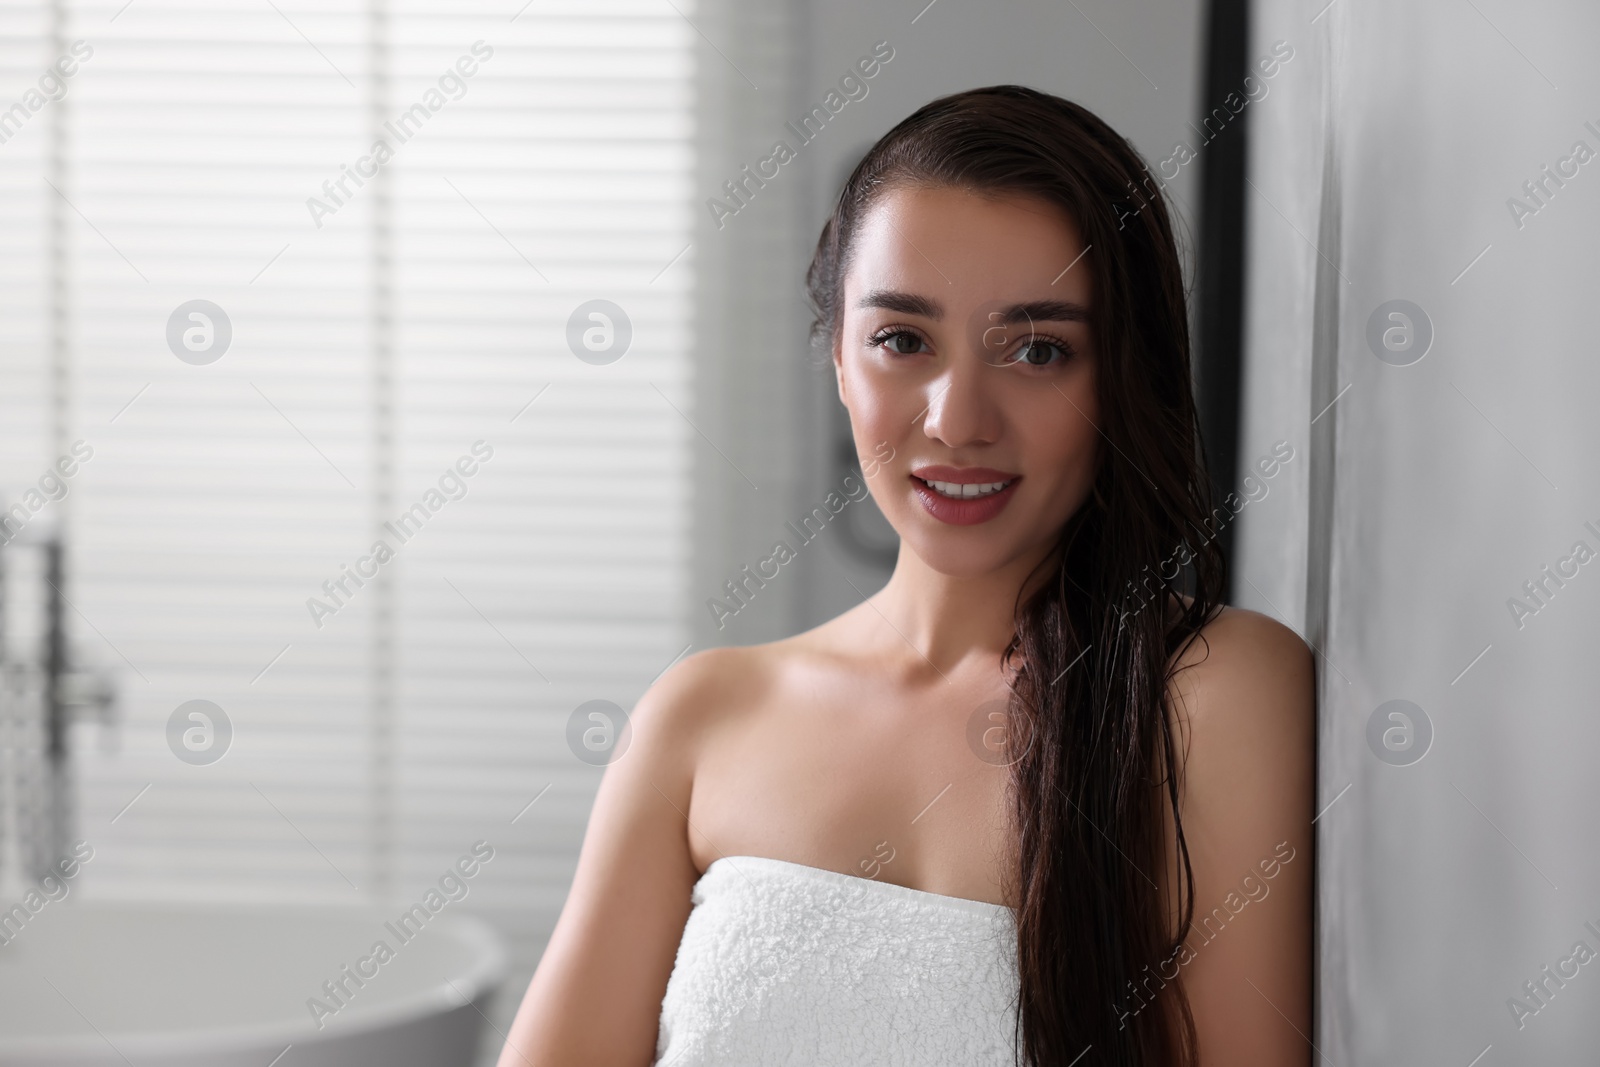 Photo of Smiling young woman after shower in bathroom. Space for text